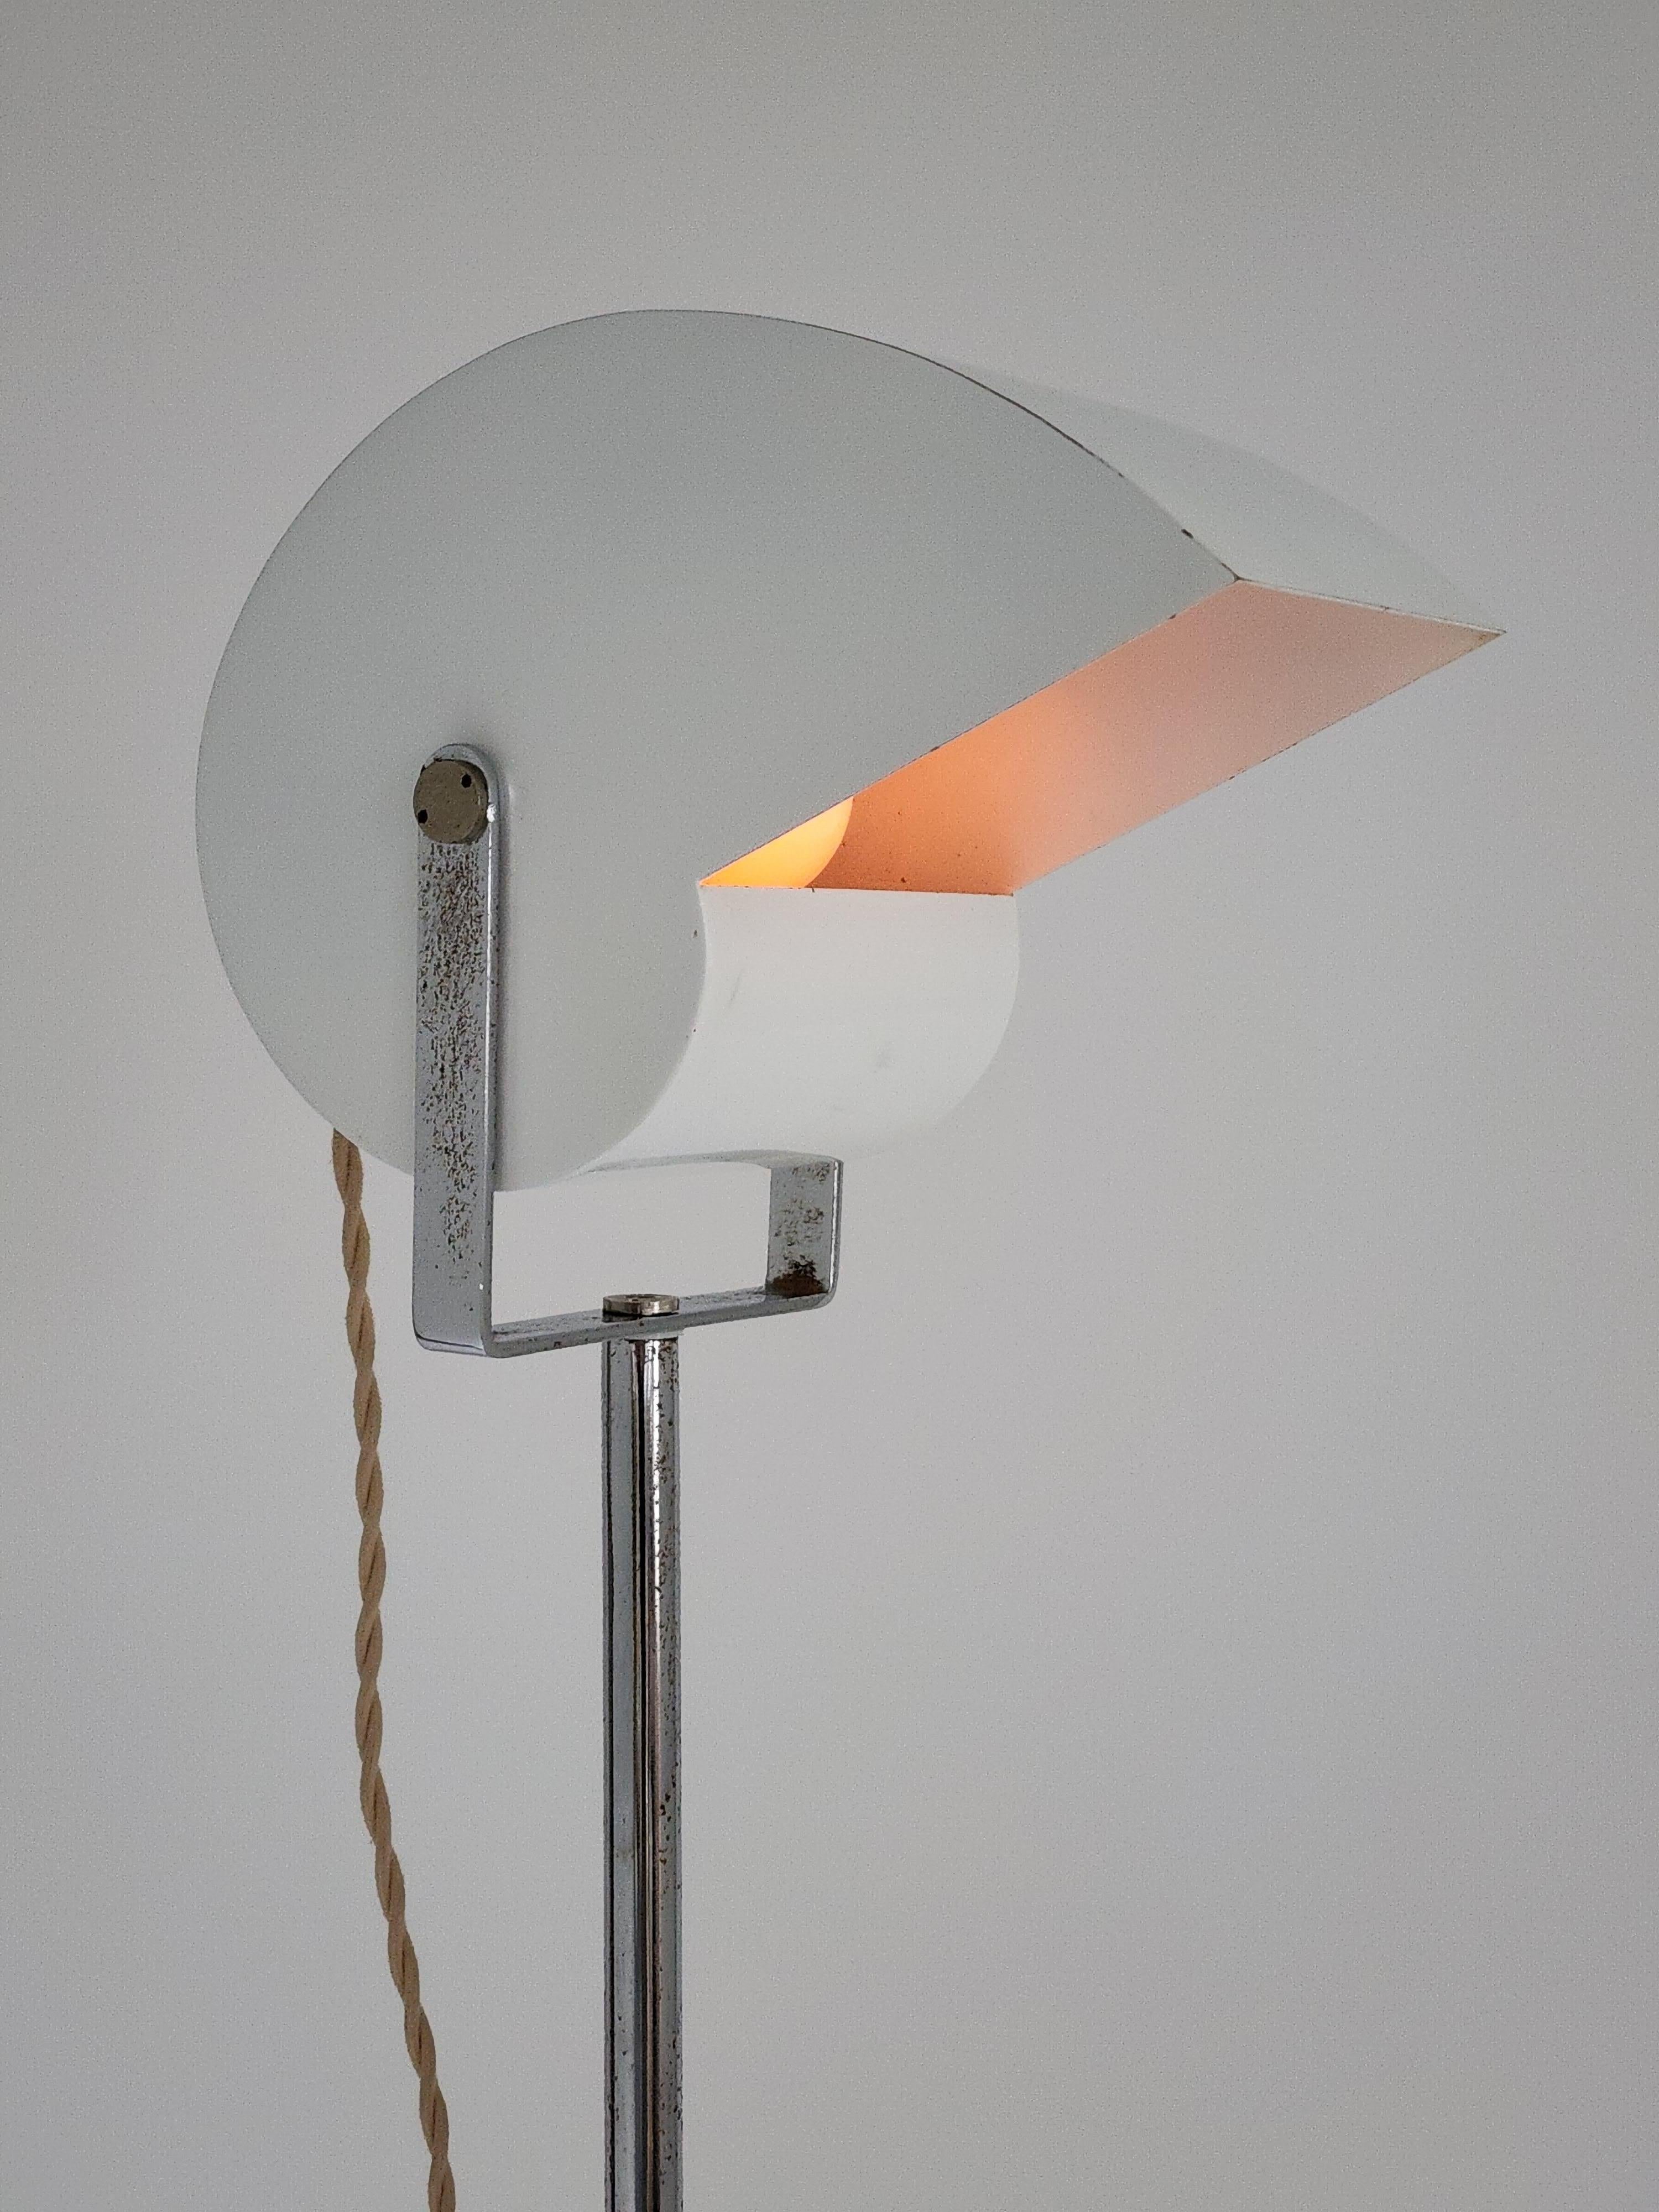 Rare ' Snail ' floor lamp by architect Giuseppe Raimondi for Studio Luce, Italy. 

Enameled shade pivot a full 360 degree horizontaly and 180 degree up and down.  

Well made strurdy construction. 

Lamp is height ajustable from 43 inches to 69